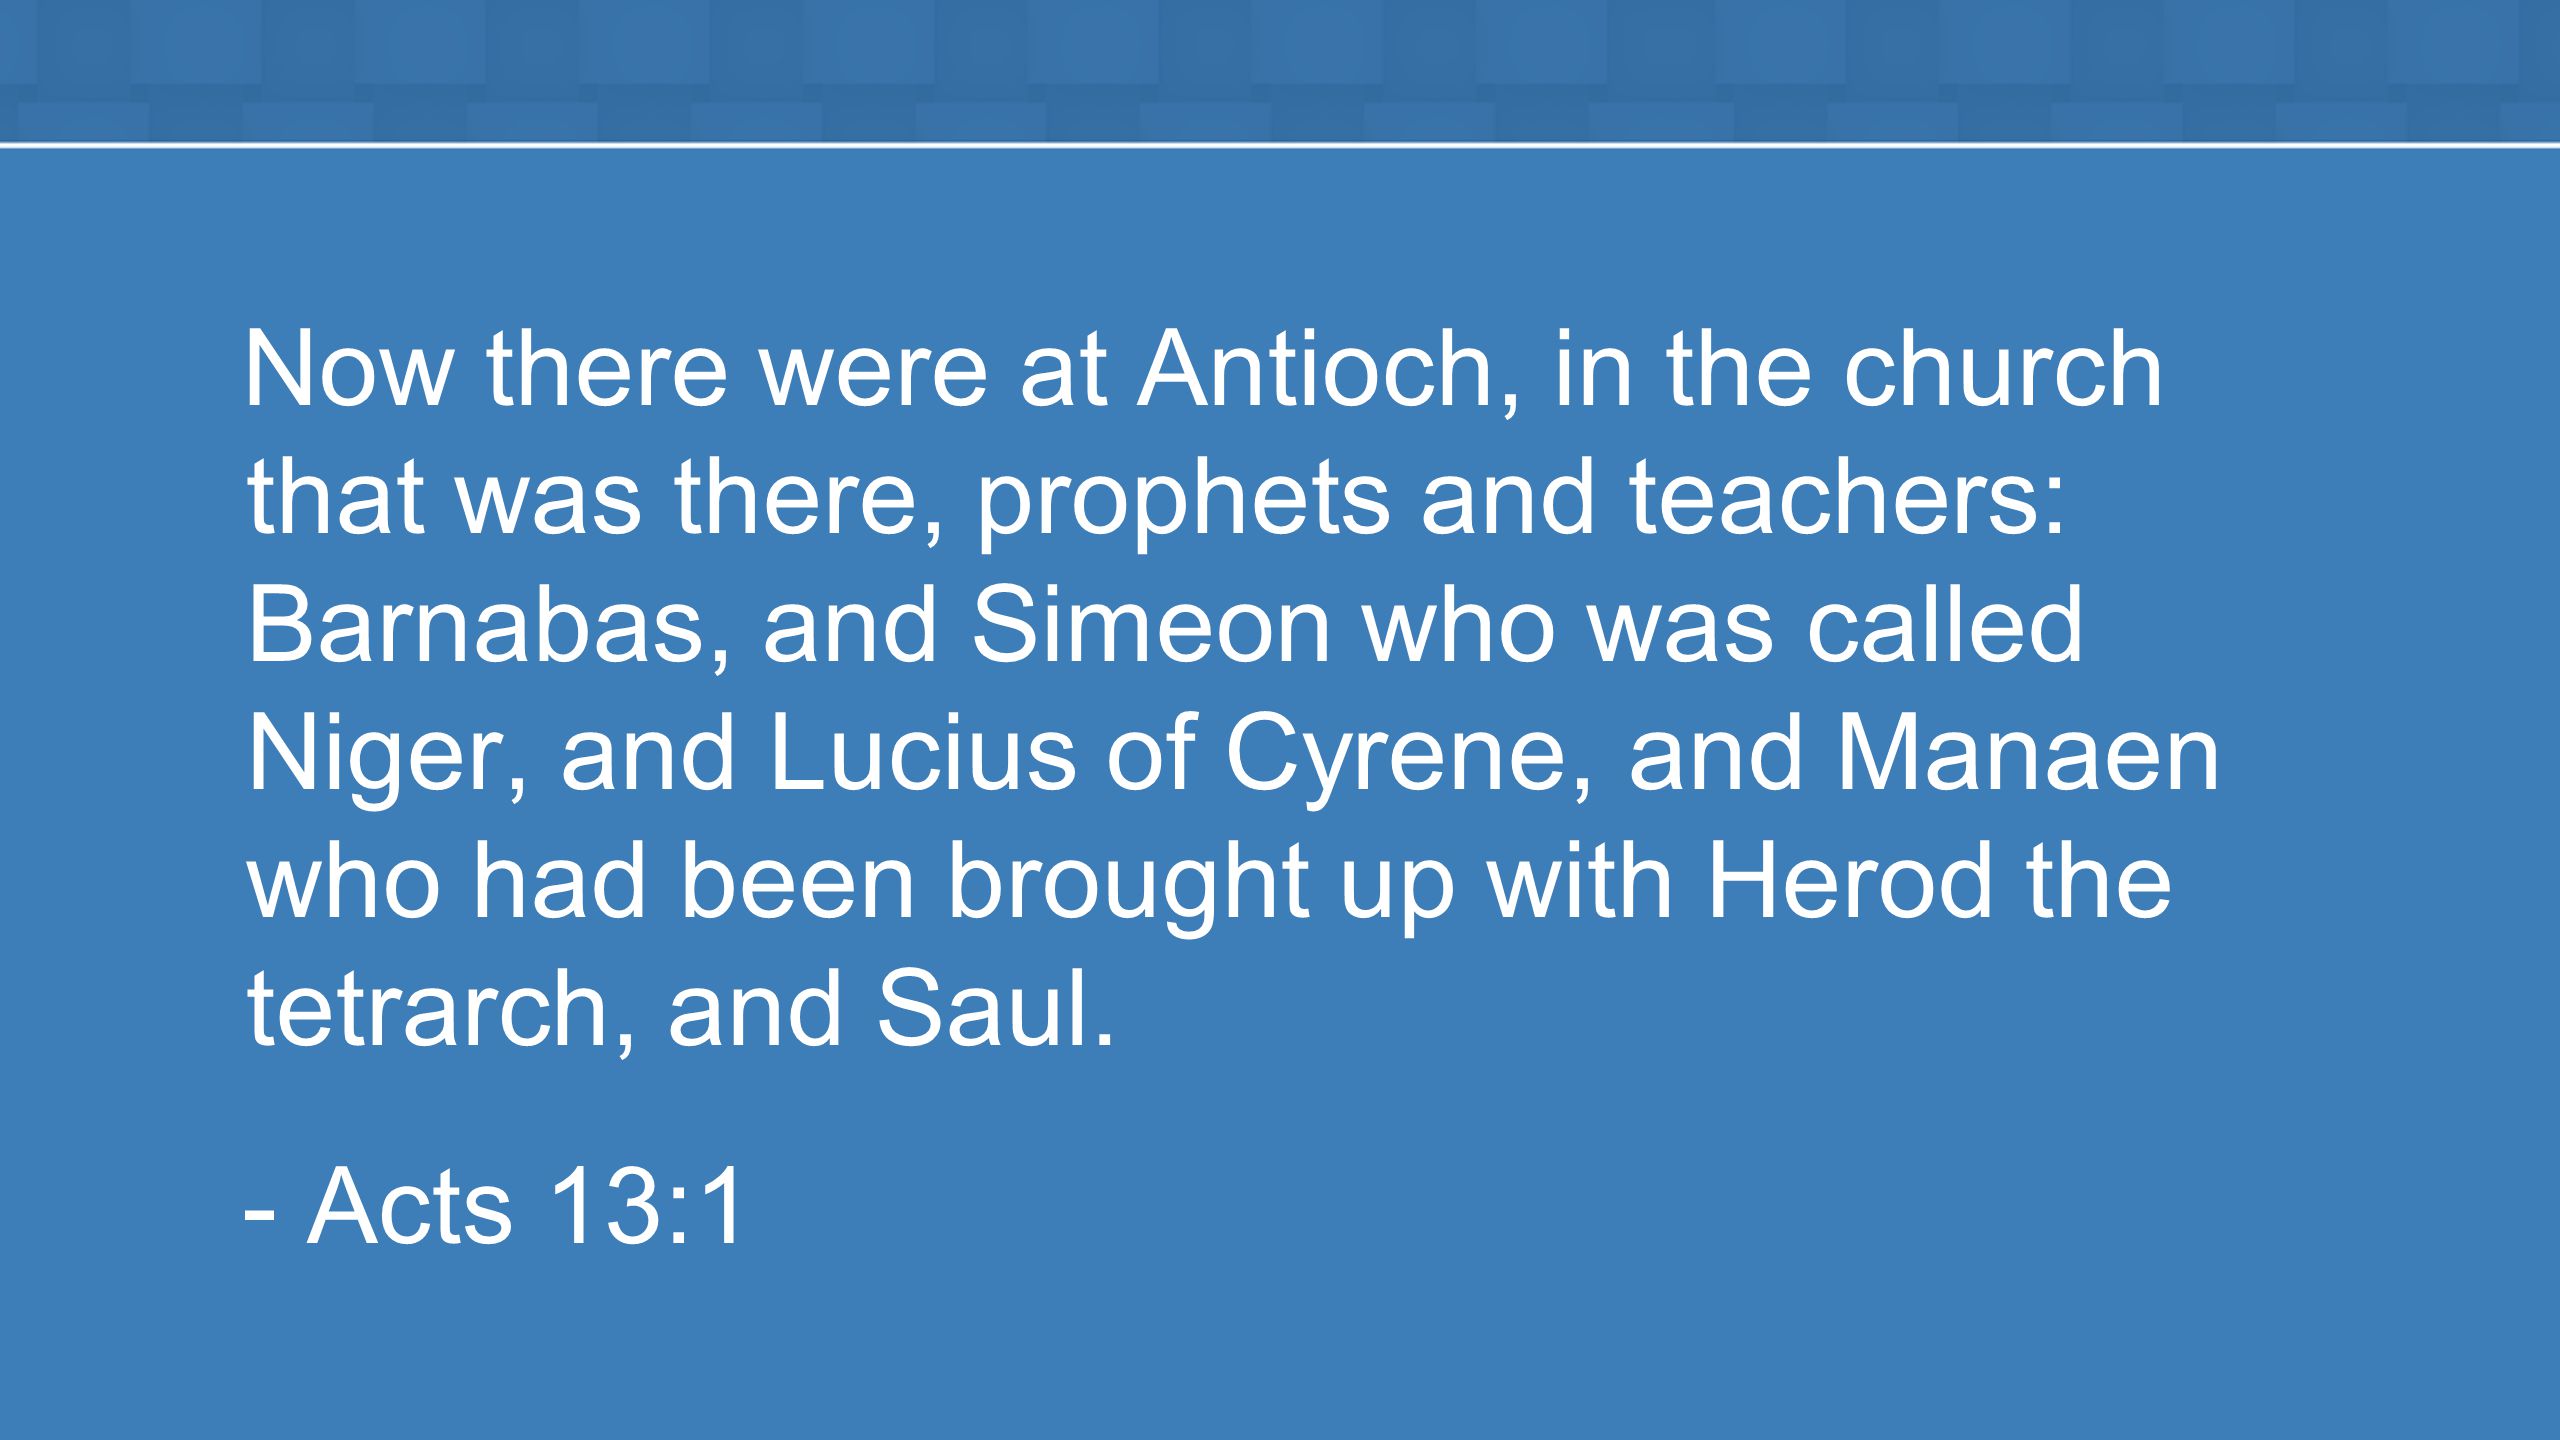 Now there were at Antioch, in the church that was there, prophets and teachers: Barnabas, and Simeon who was called Niger, and Lucius of Cyrene, and Manaen who had been brought up with Herod the tetrarch, and Saul.